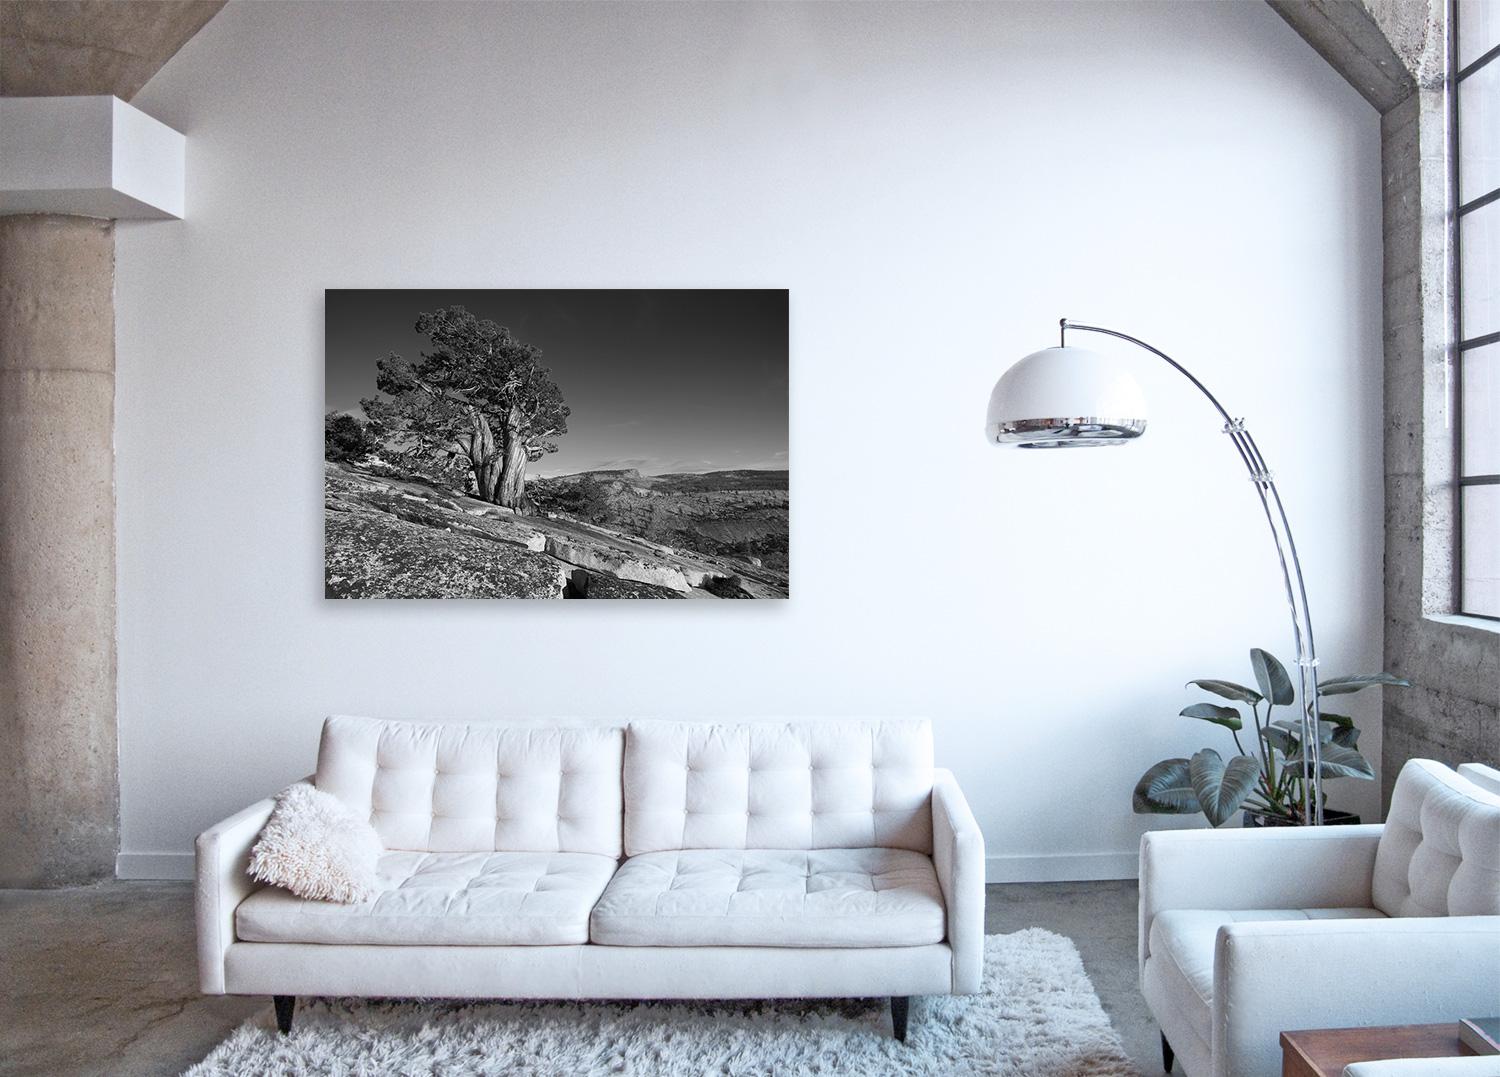 Tree Study IV - large format b/w photograph of lone ancient tree in landscape For Sale 1